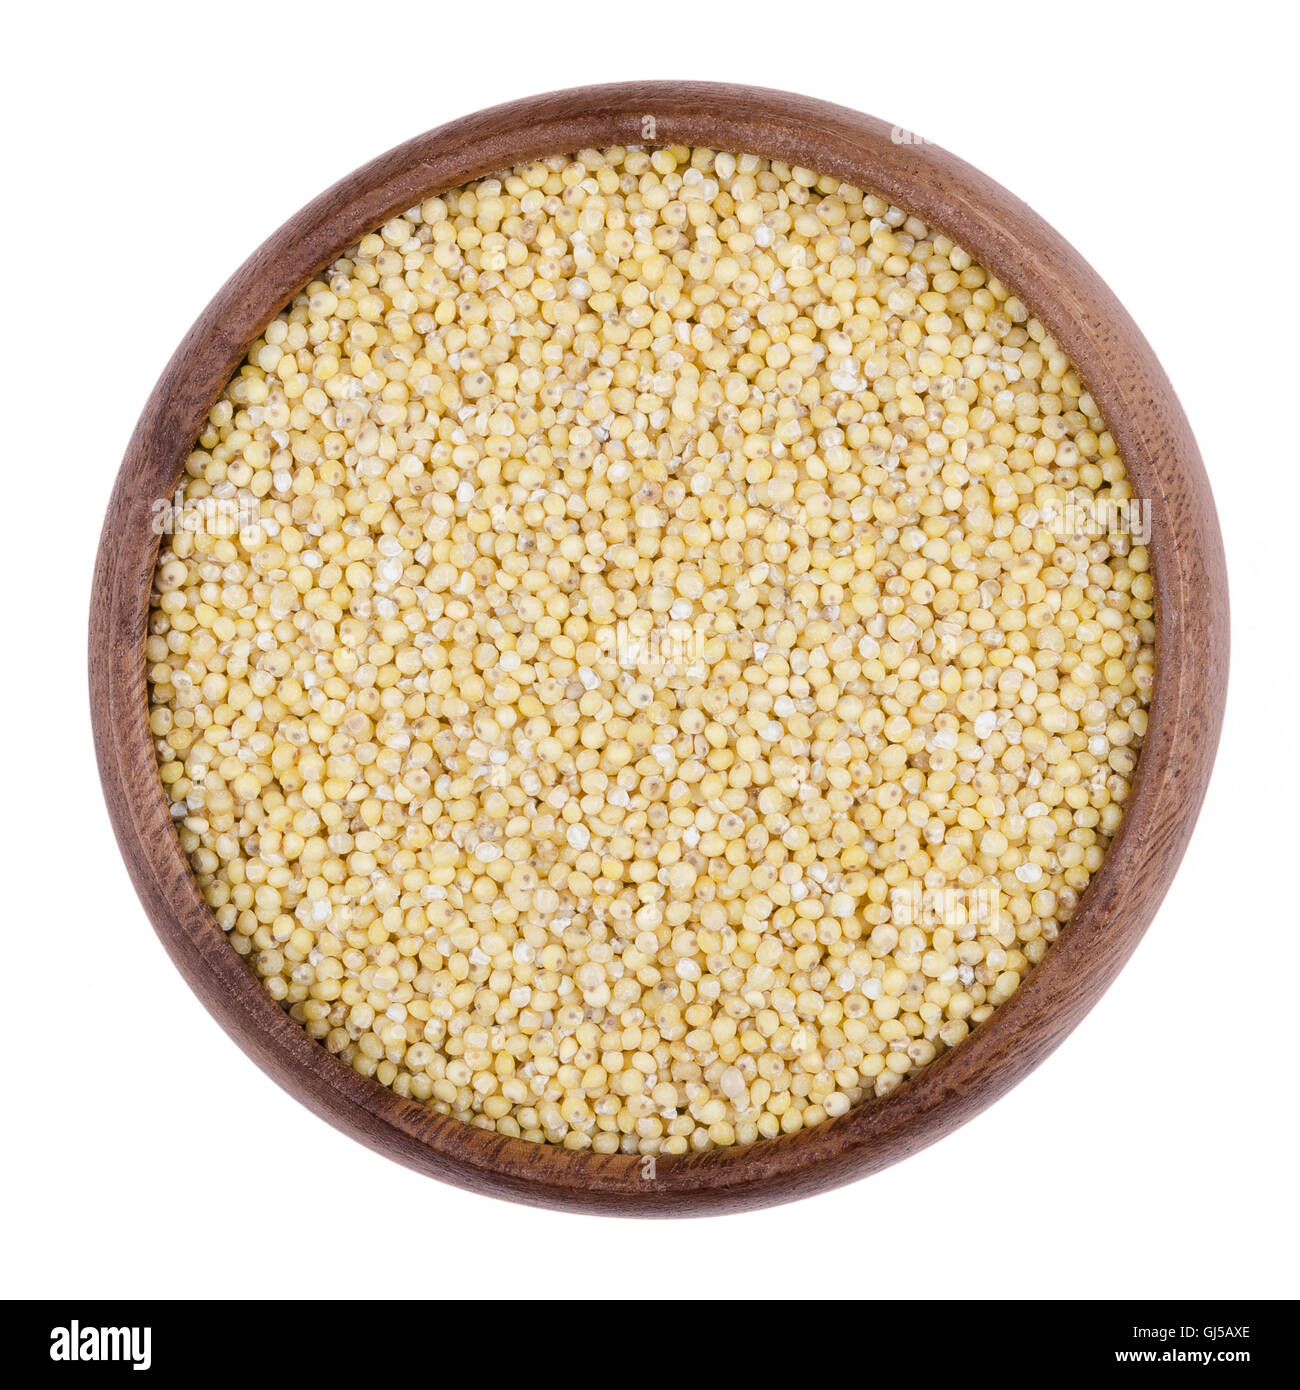 Yellow millet in a wooden bowl on white background. The small seeds are grown as cereal crops or grains. Stock Photo